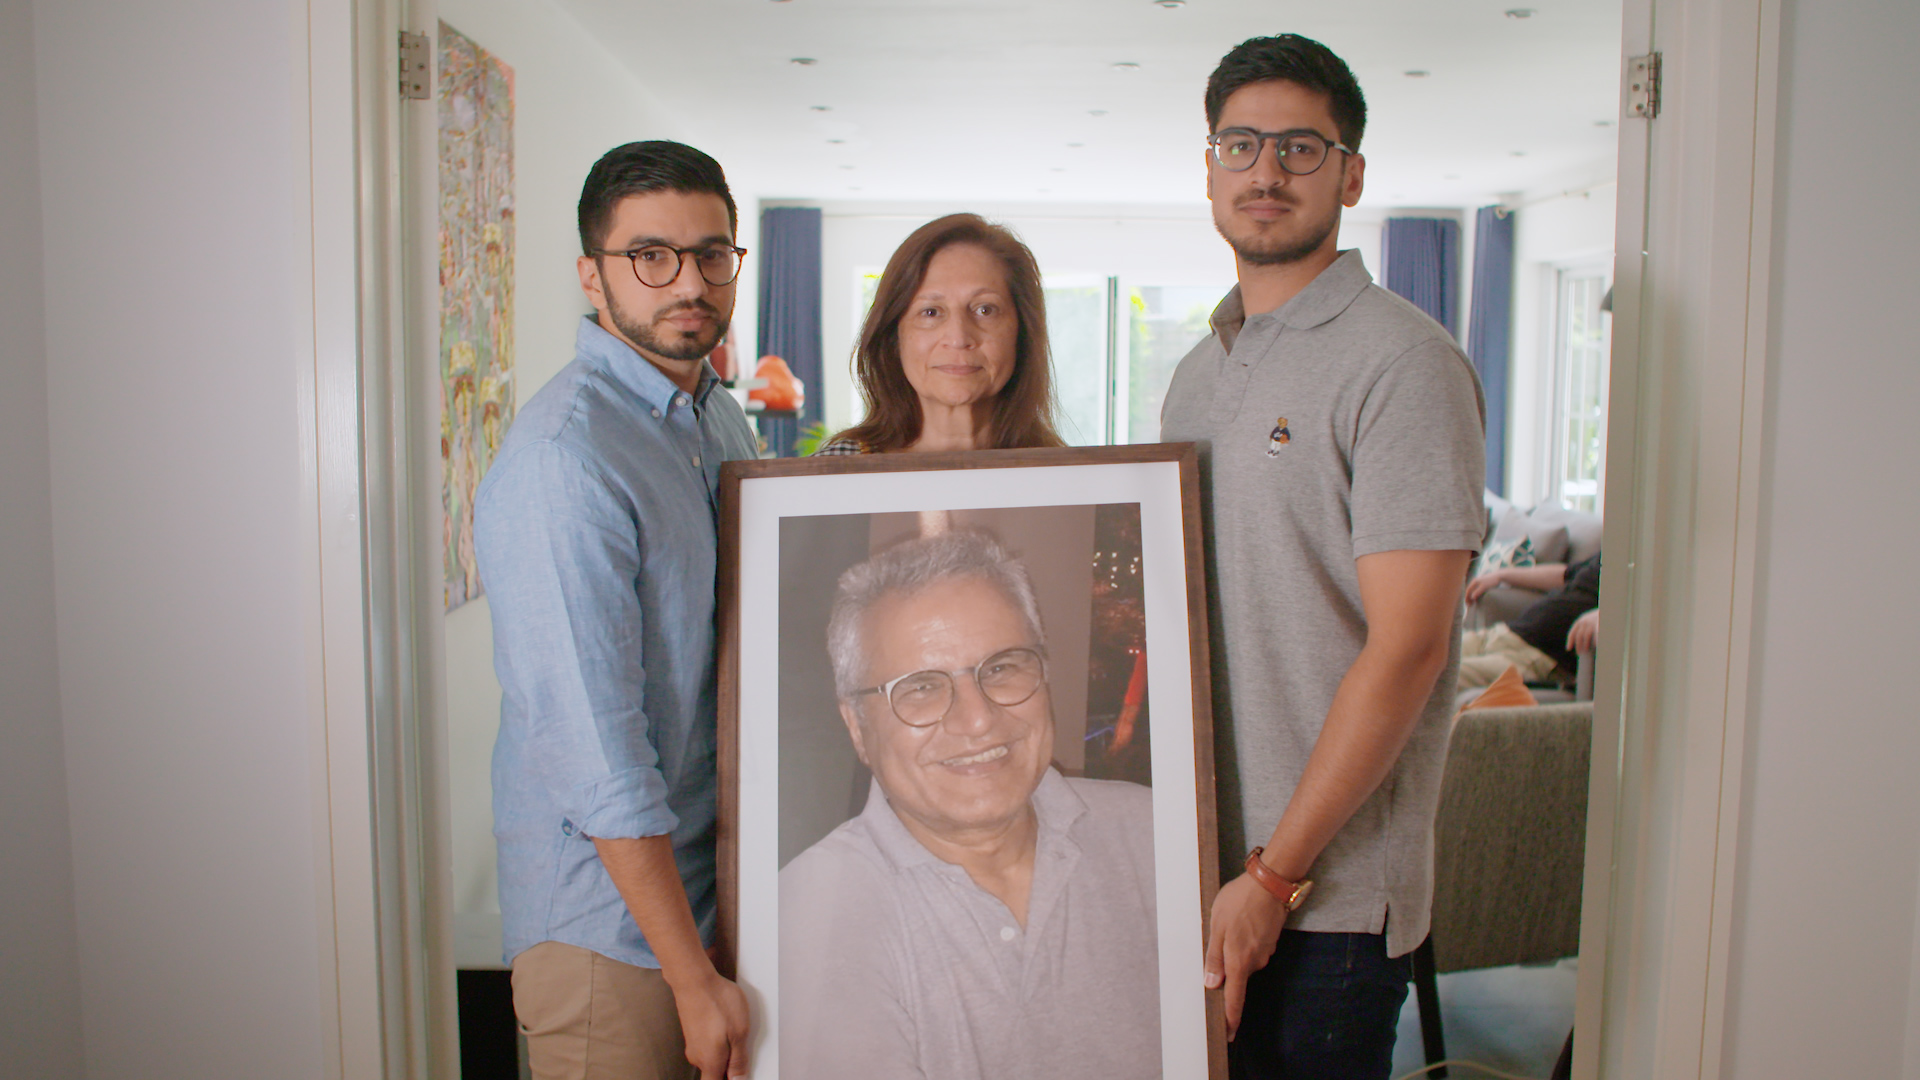 The Kakkad family with a photo of father, Bharat, who died and donated his organs early in 2019